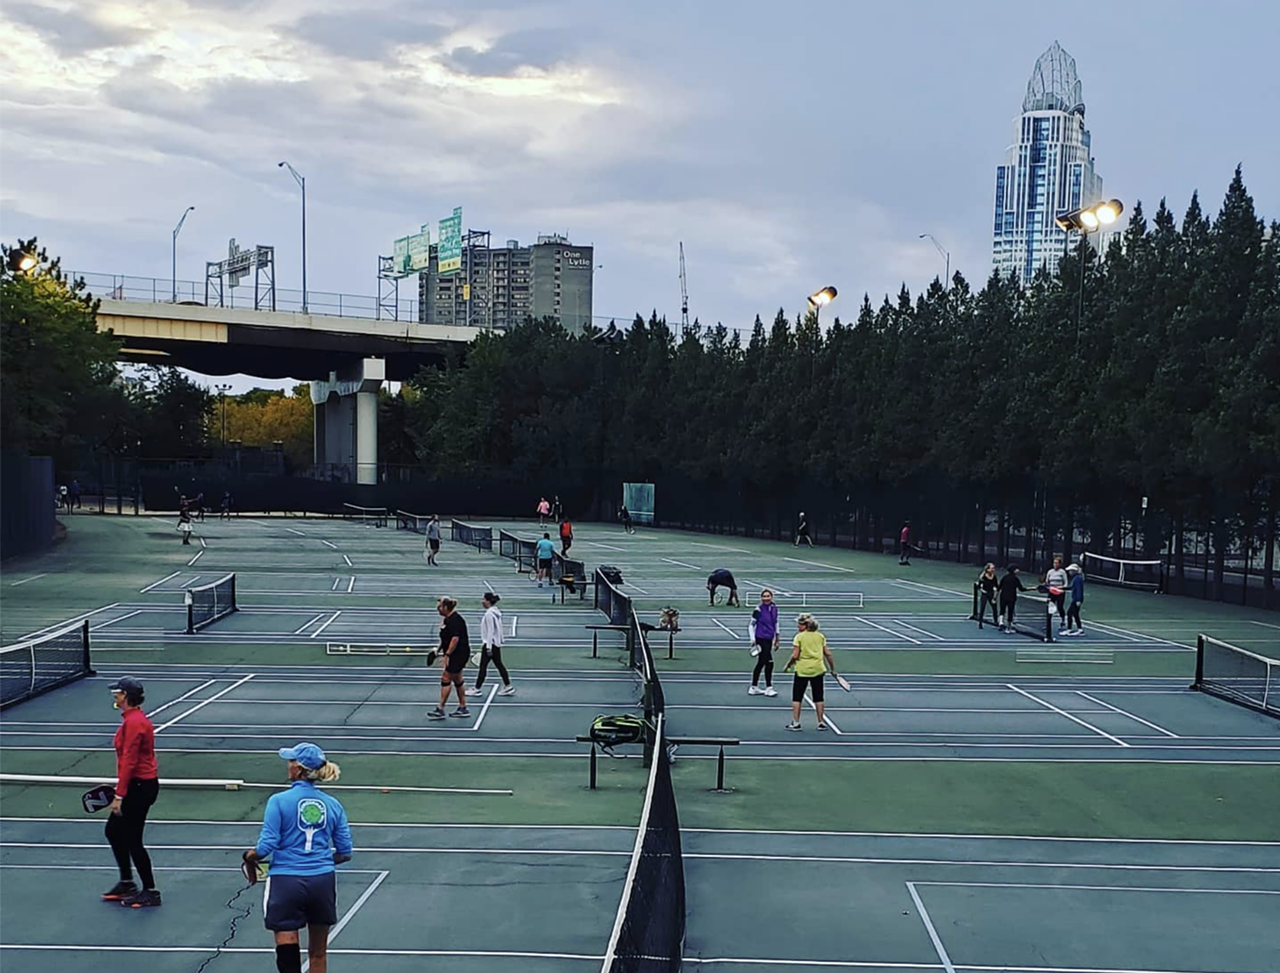 Challenge Your Date to a Friendly Game of Pickleball at Sawyer Point
Free
If you have the gear, you and your date can have a friendly competition at Sawyer Point to see who’s the pickleball champ. Their courts are open and free to play on from March through December, and players of all skill levels are welcome. They even installed state-of-the-art LED lighting and are open until 10 p.m. so you can keep playing late into the night. 815 E. Pete Rose Way, Downtown.